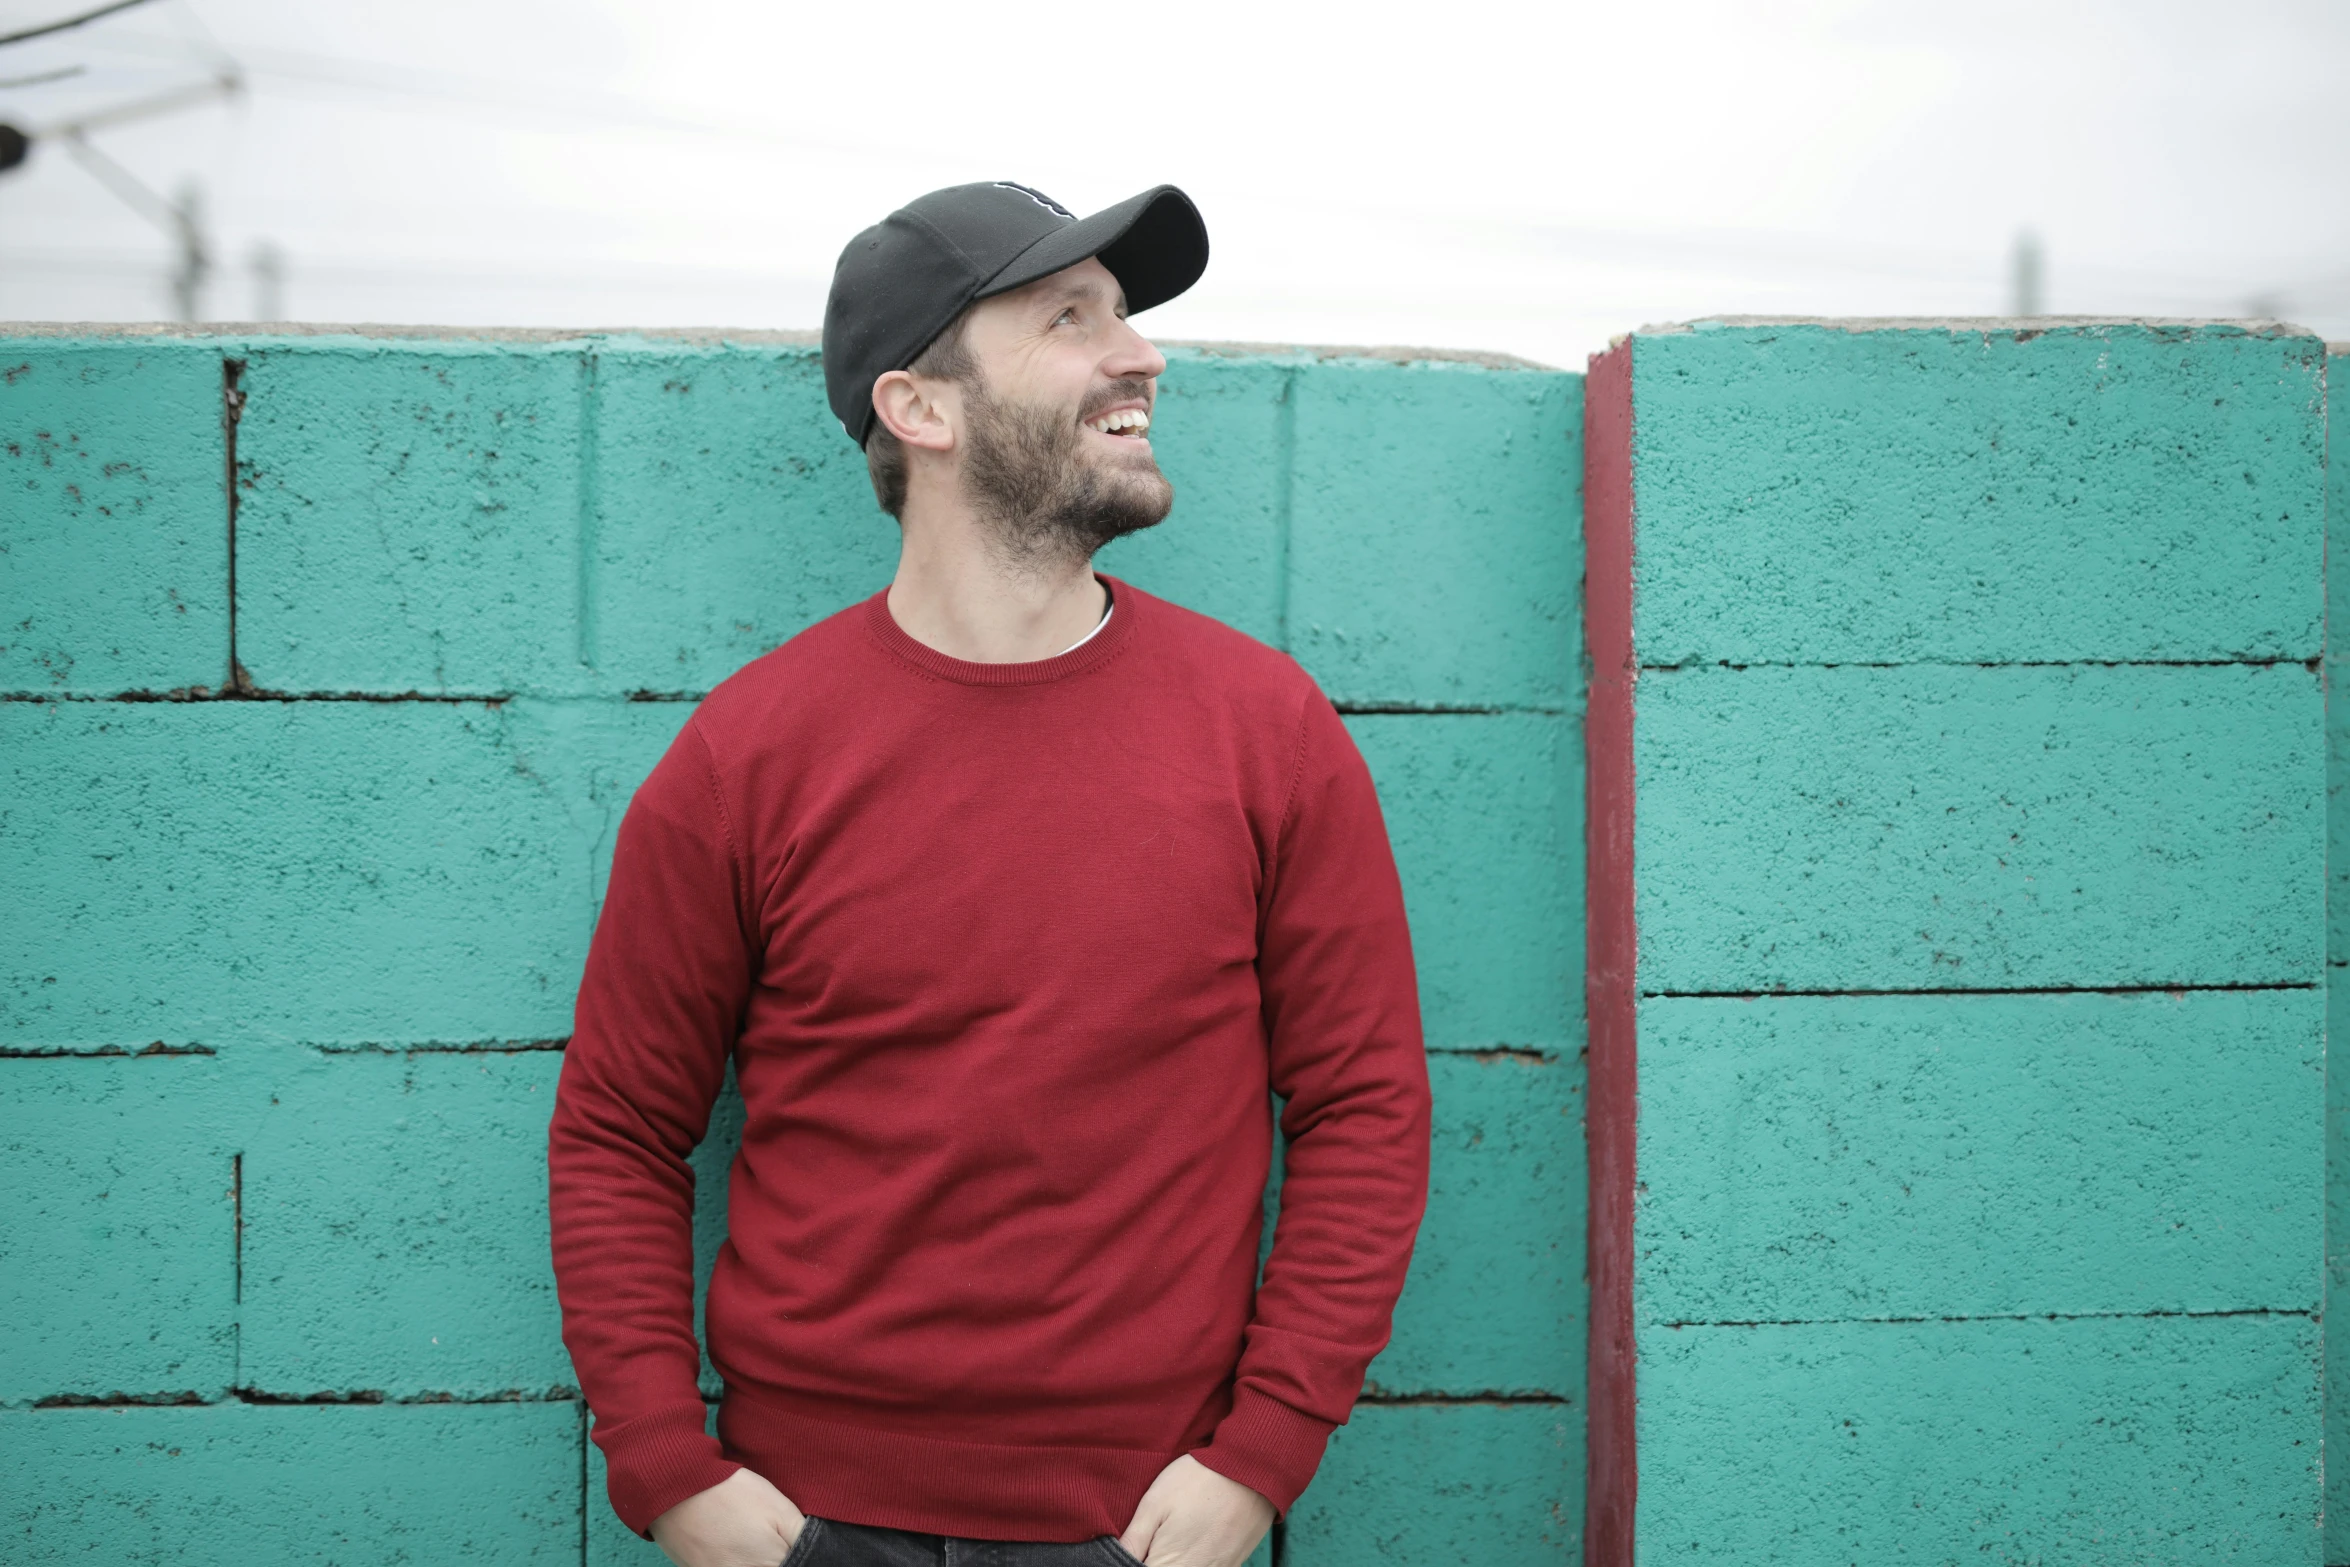 a man standing in front of a green wall, an album cover, pexels contest winner, red sweater and gray pants, laughing, profile image, standing on rooftop